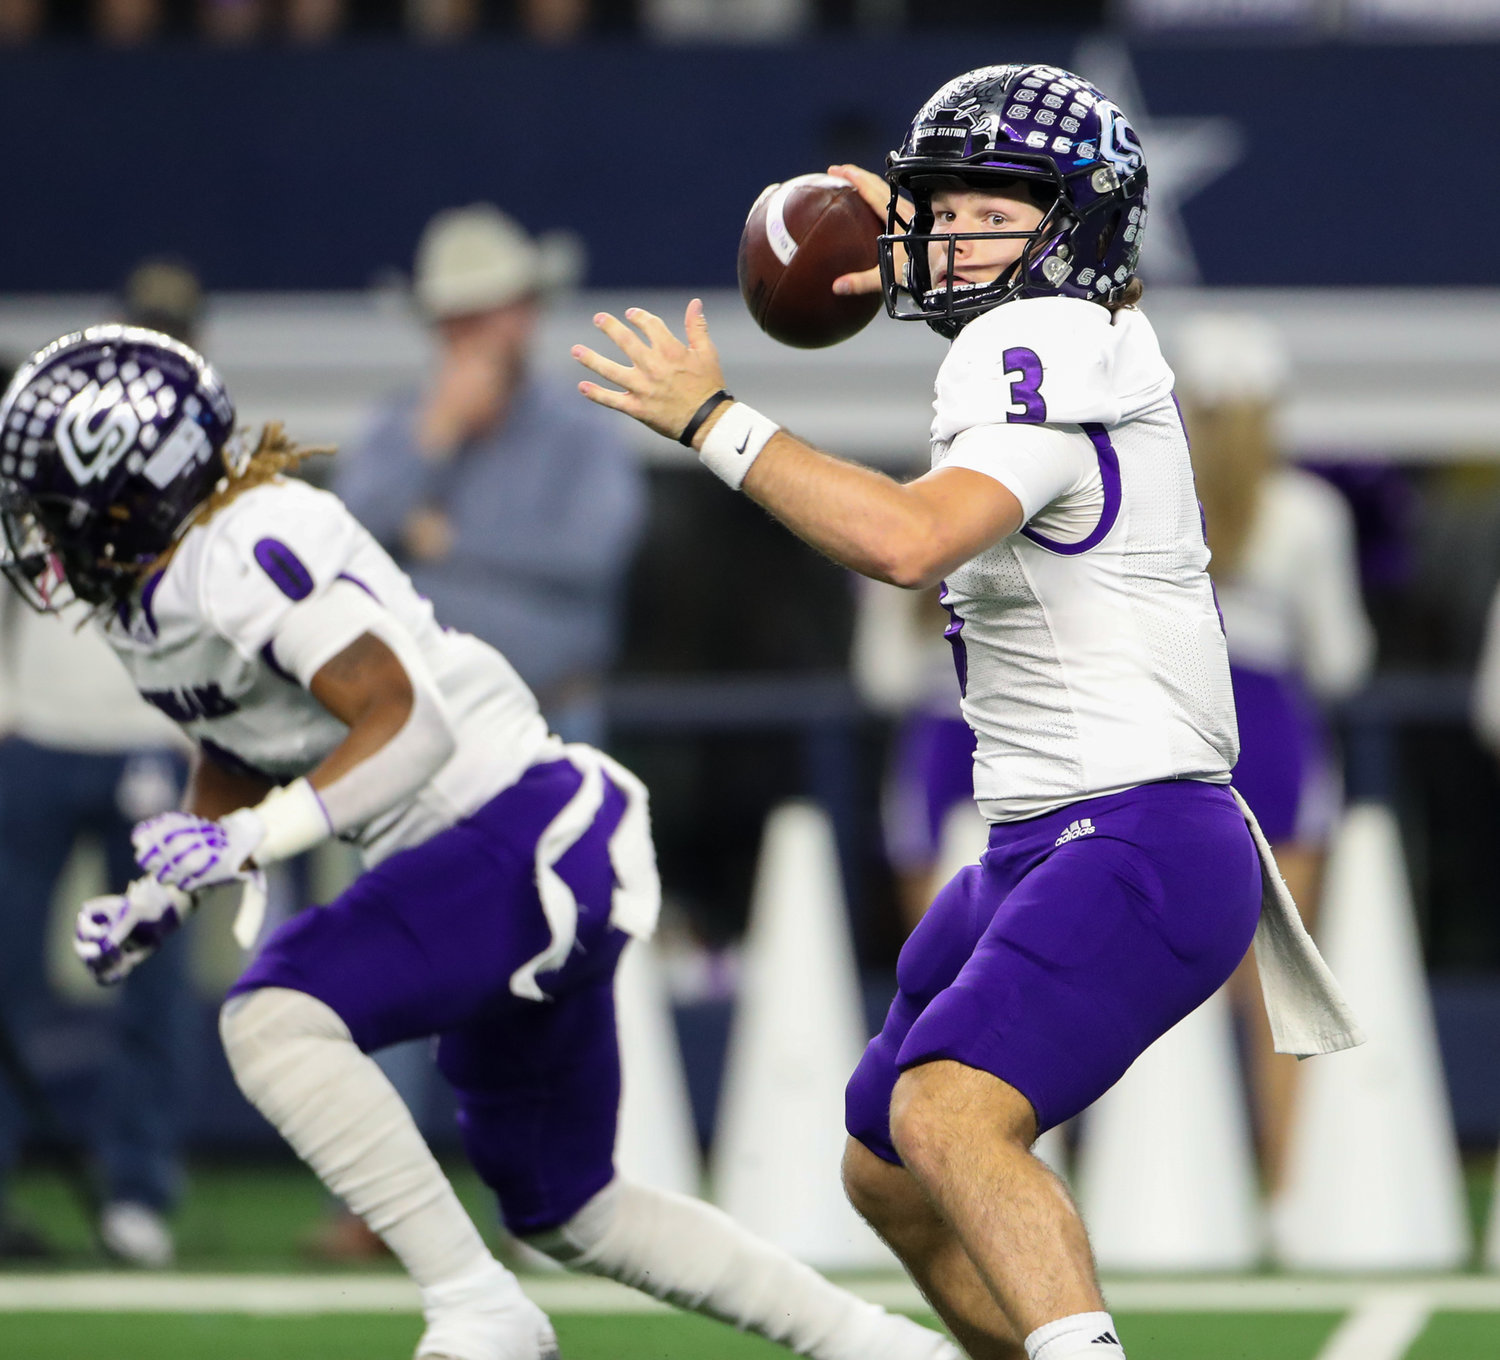 College Station Cougars quarterback Jett Huff (3) passes the ball during the Class 5A-Division I state football championship game between Paetow and College Station on December 17, 2021 in Arlington, Texas.